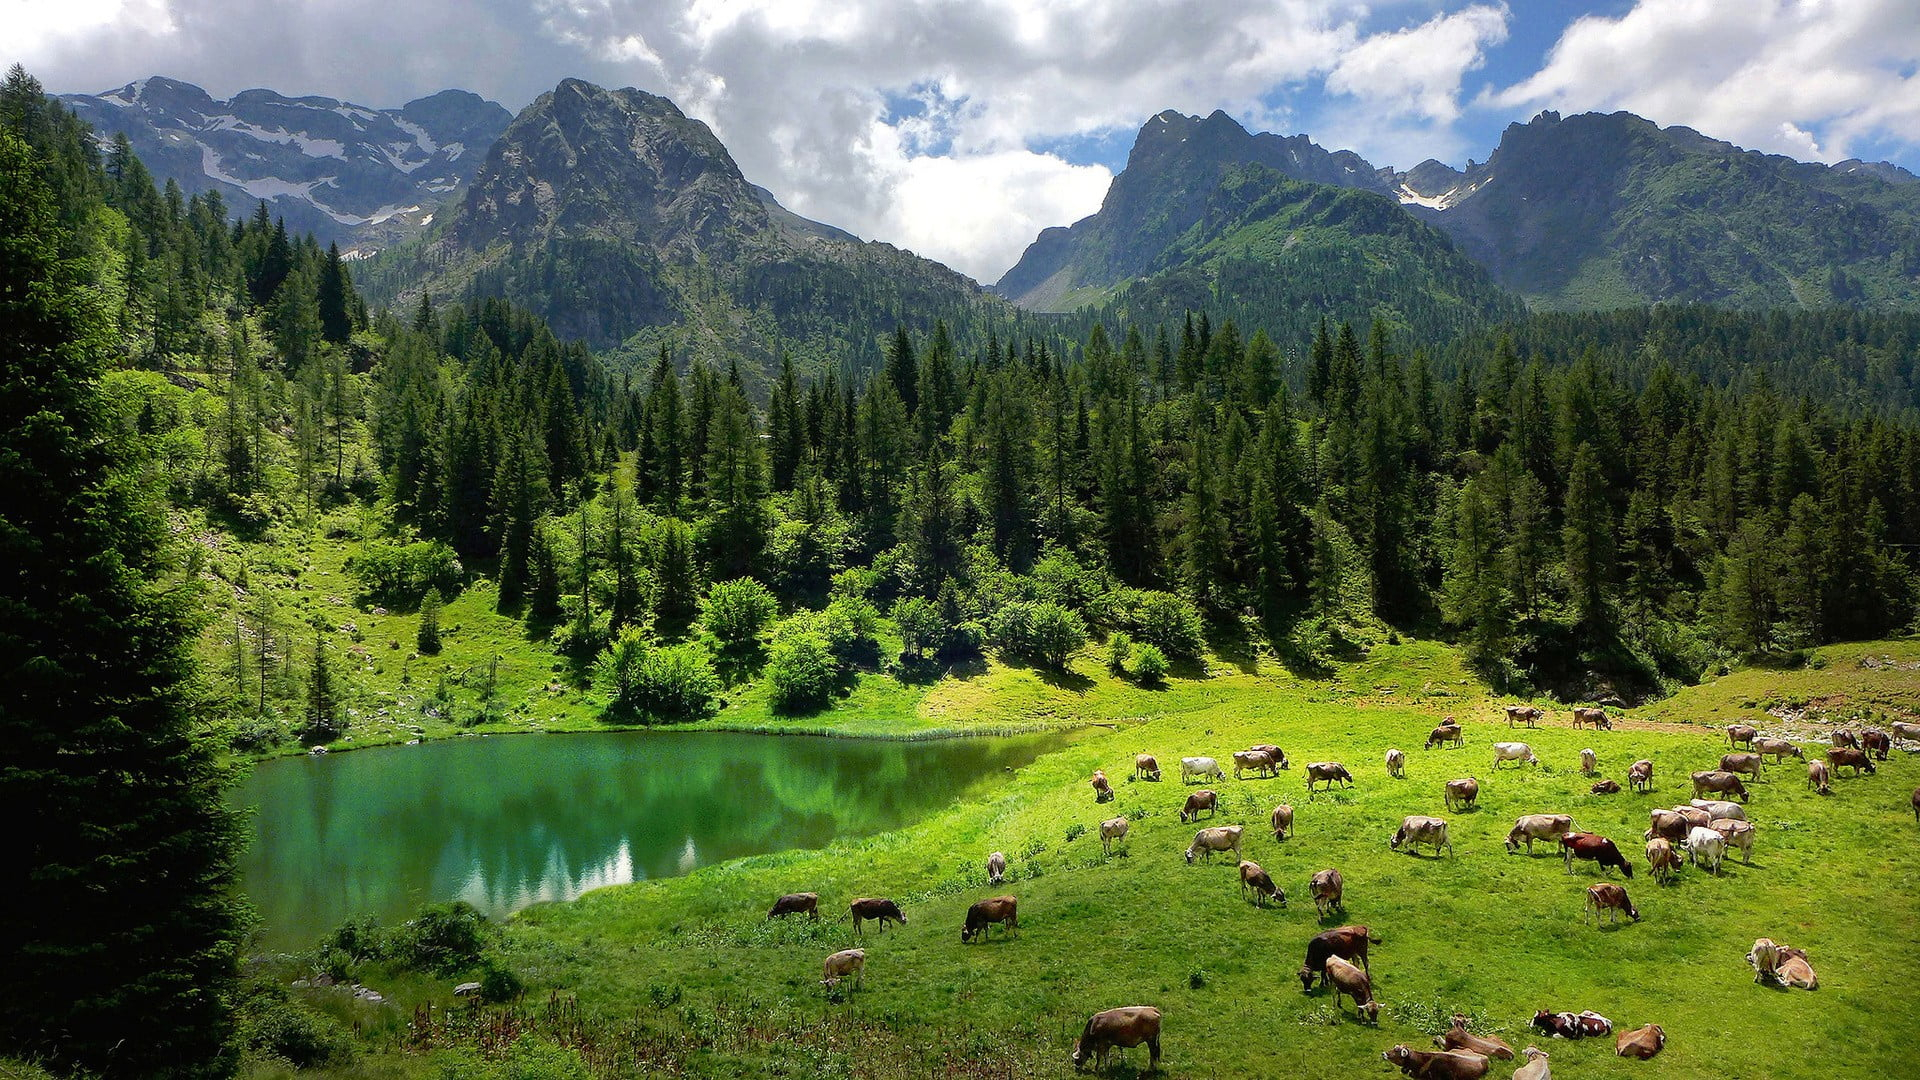 Green leafed trees wallpaper, nature, landscape, forest, Alps, Italy, water